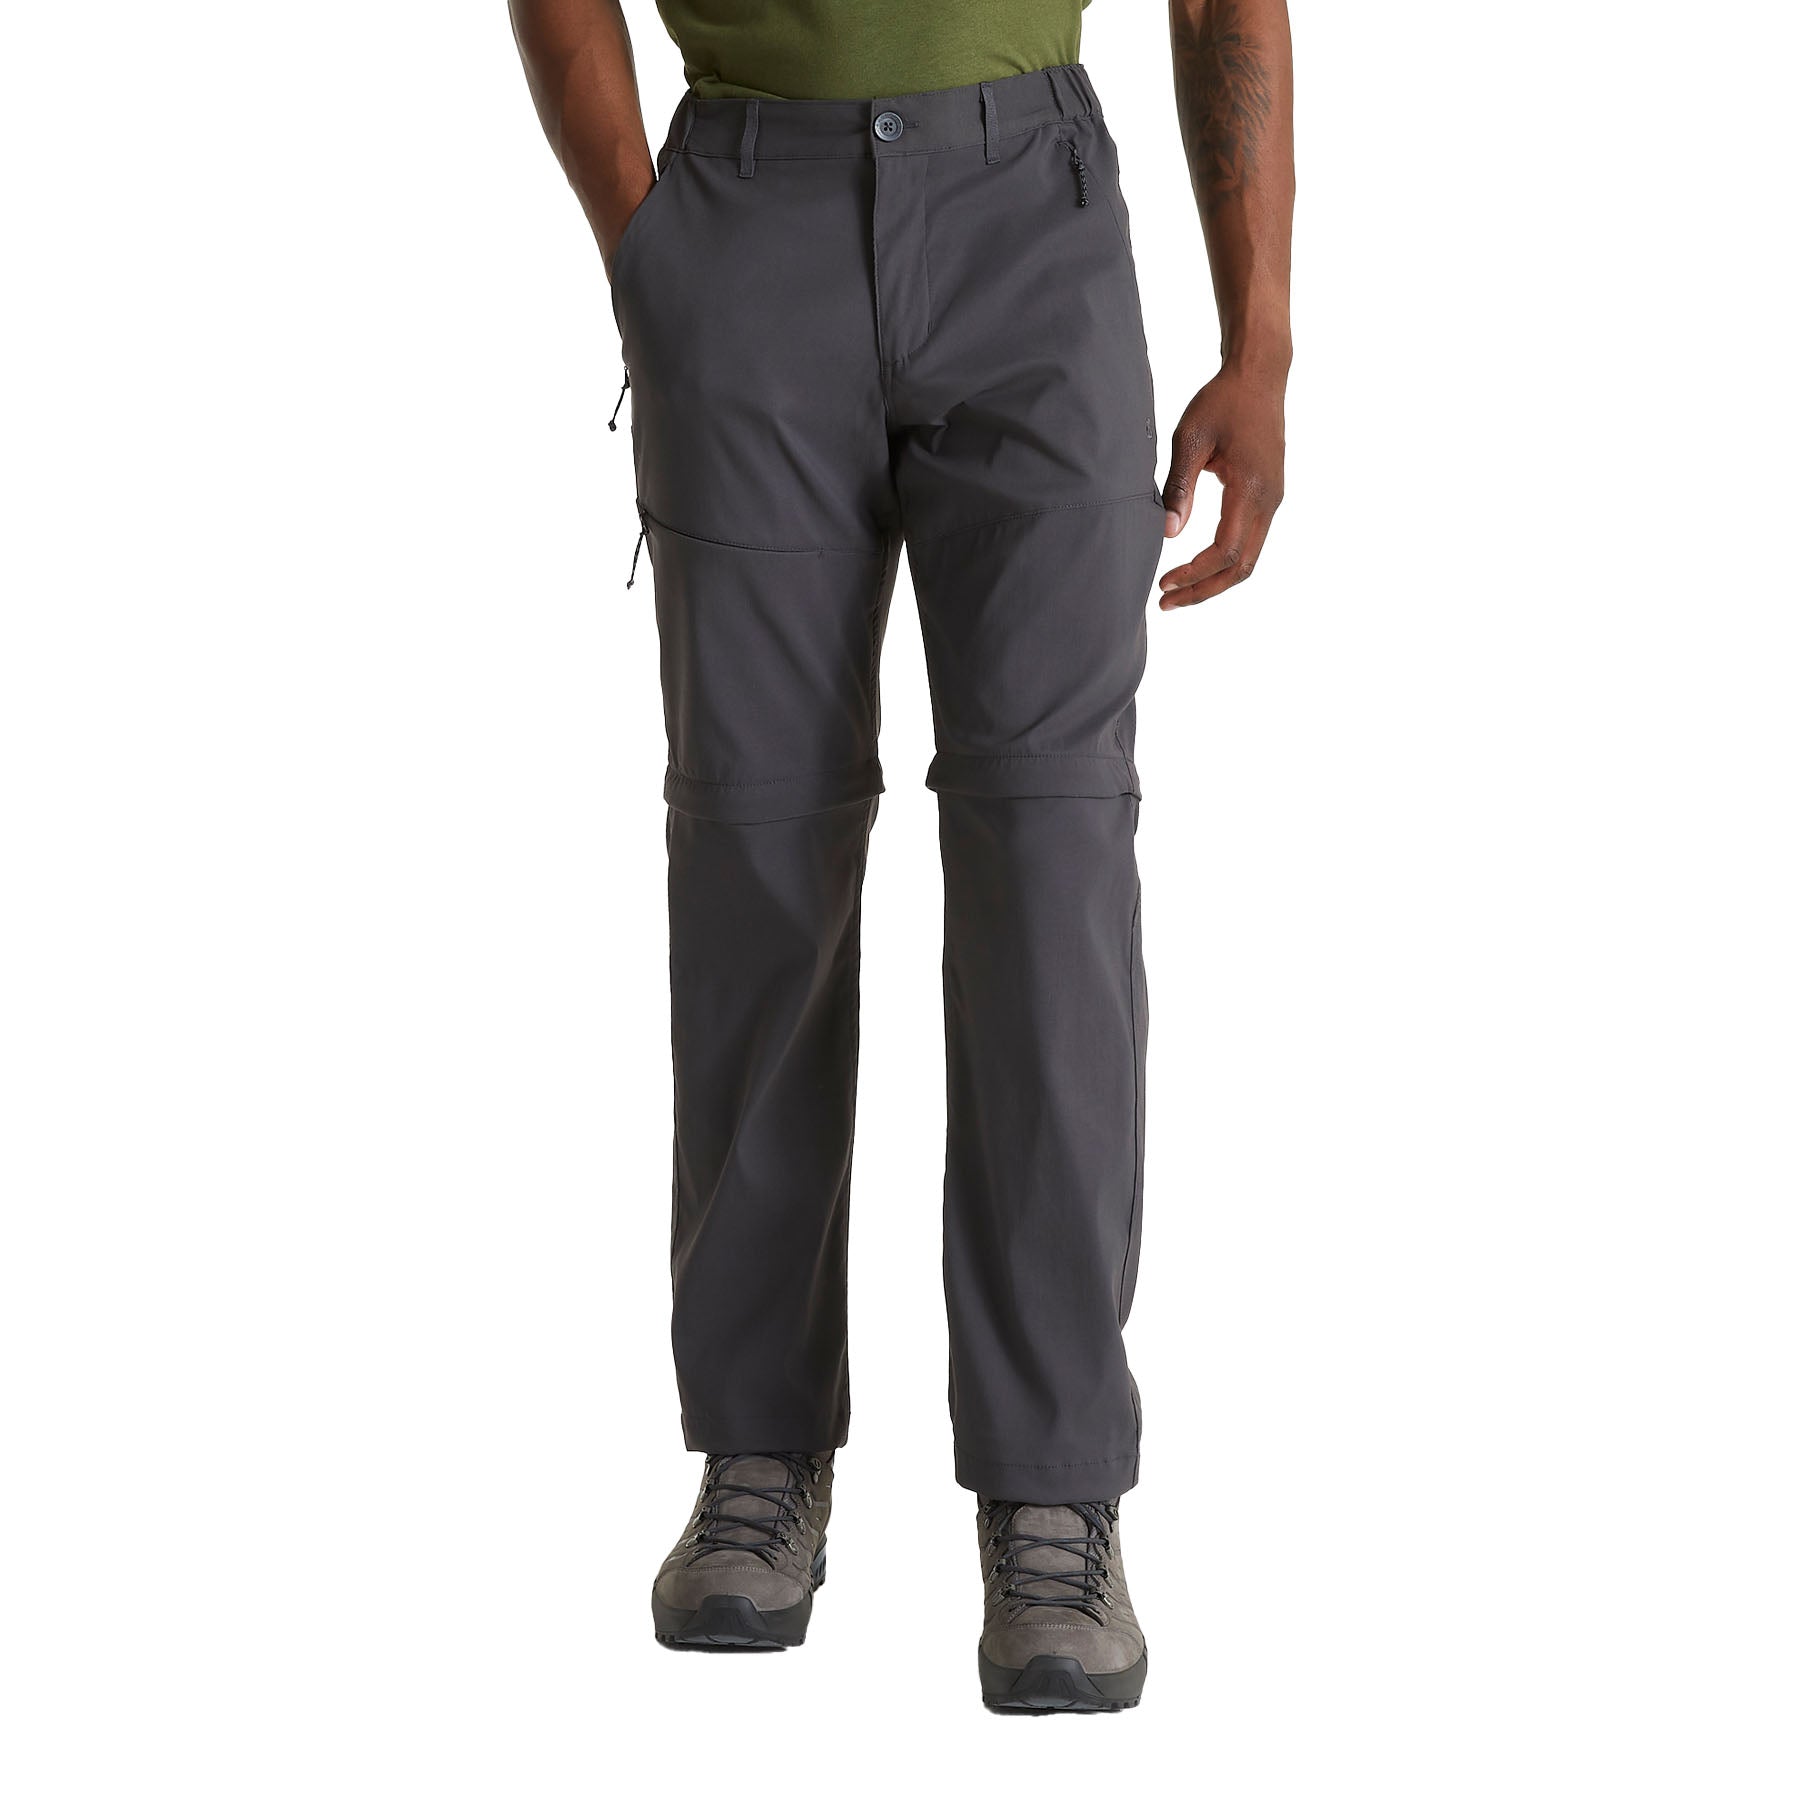 Craghoppers Nosilife Convertible Pants review - Active-Traveller